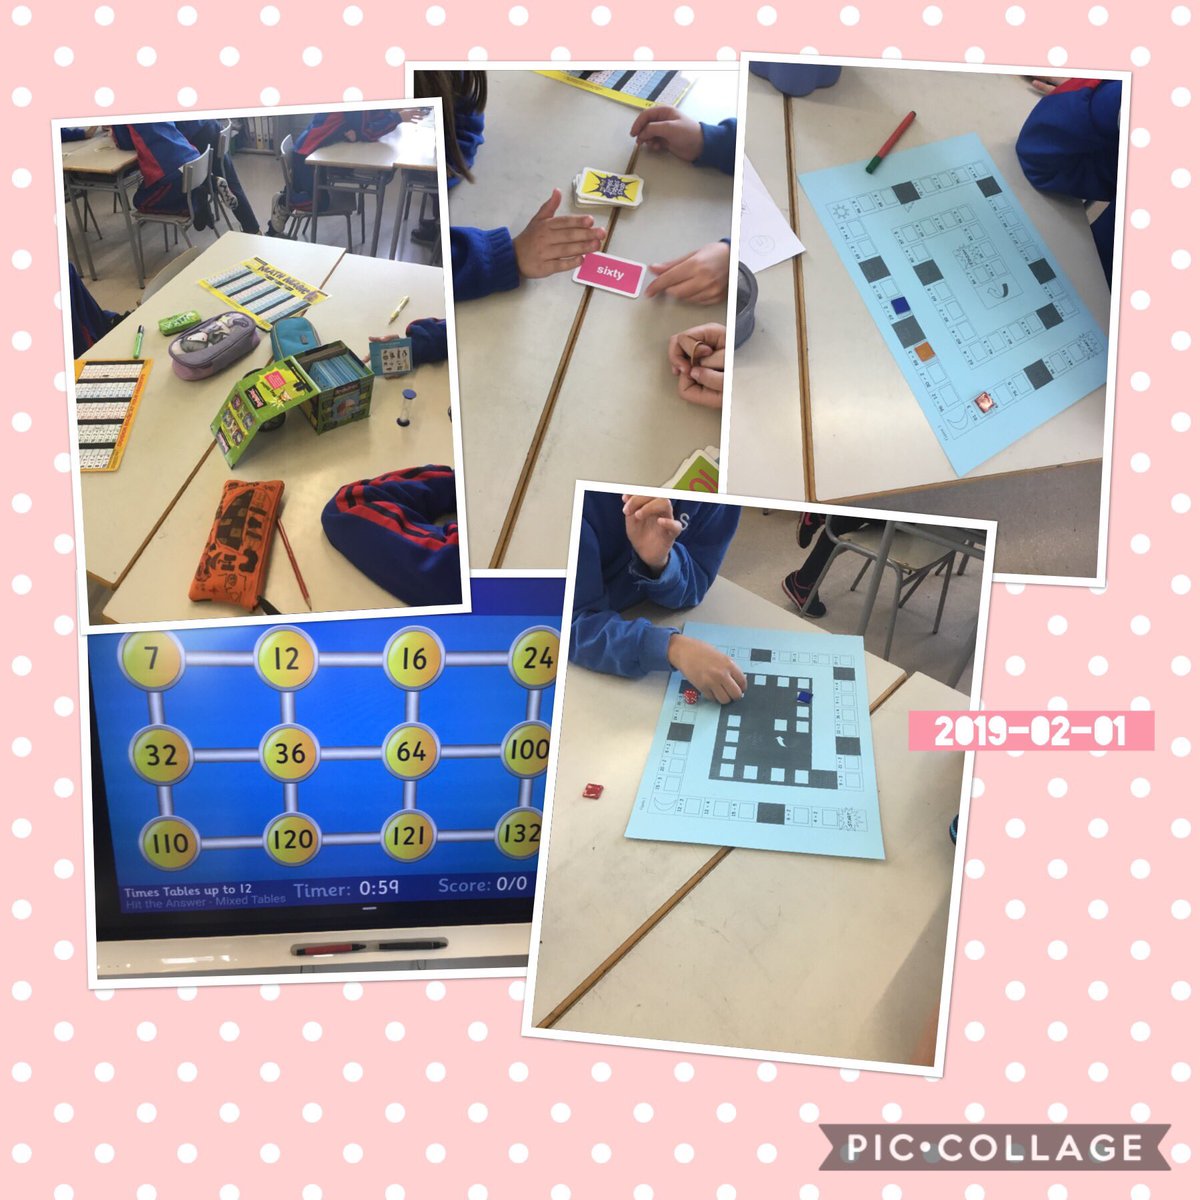 To celebrate finishing x and division we played some active maths games to practice and hone our skills. #mathsisfun #Y5DRAGONS @BSB_Barcelona